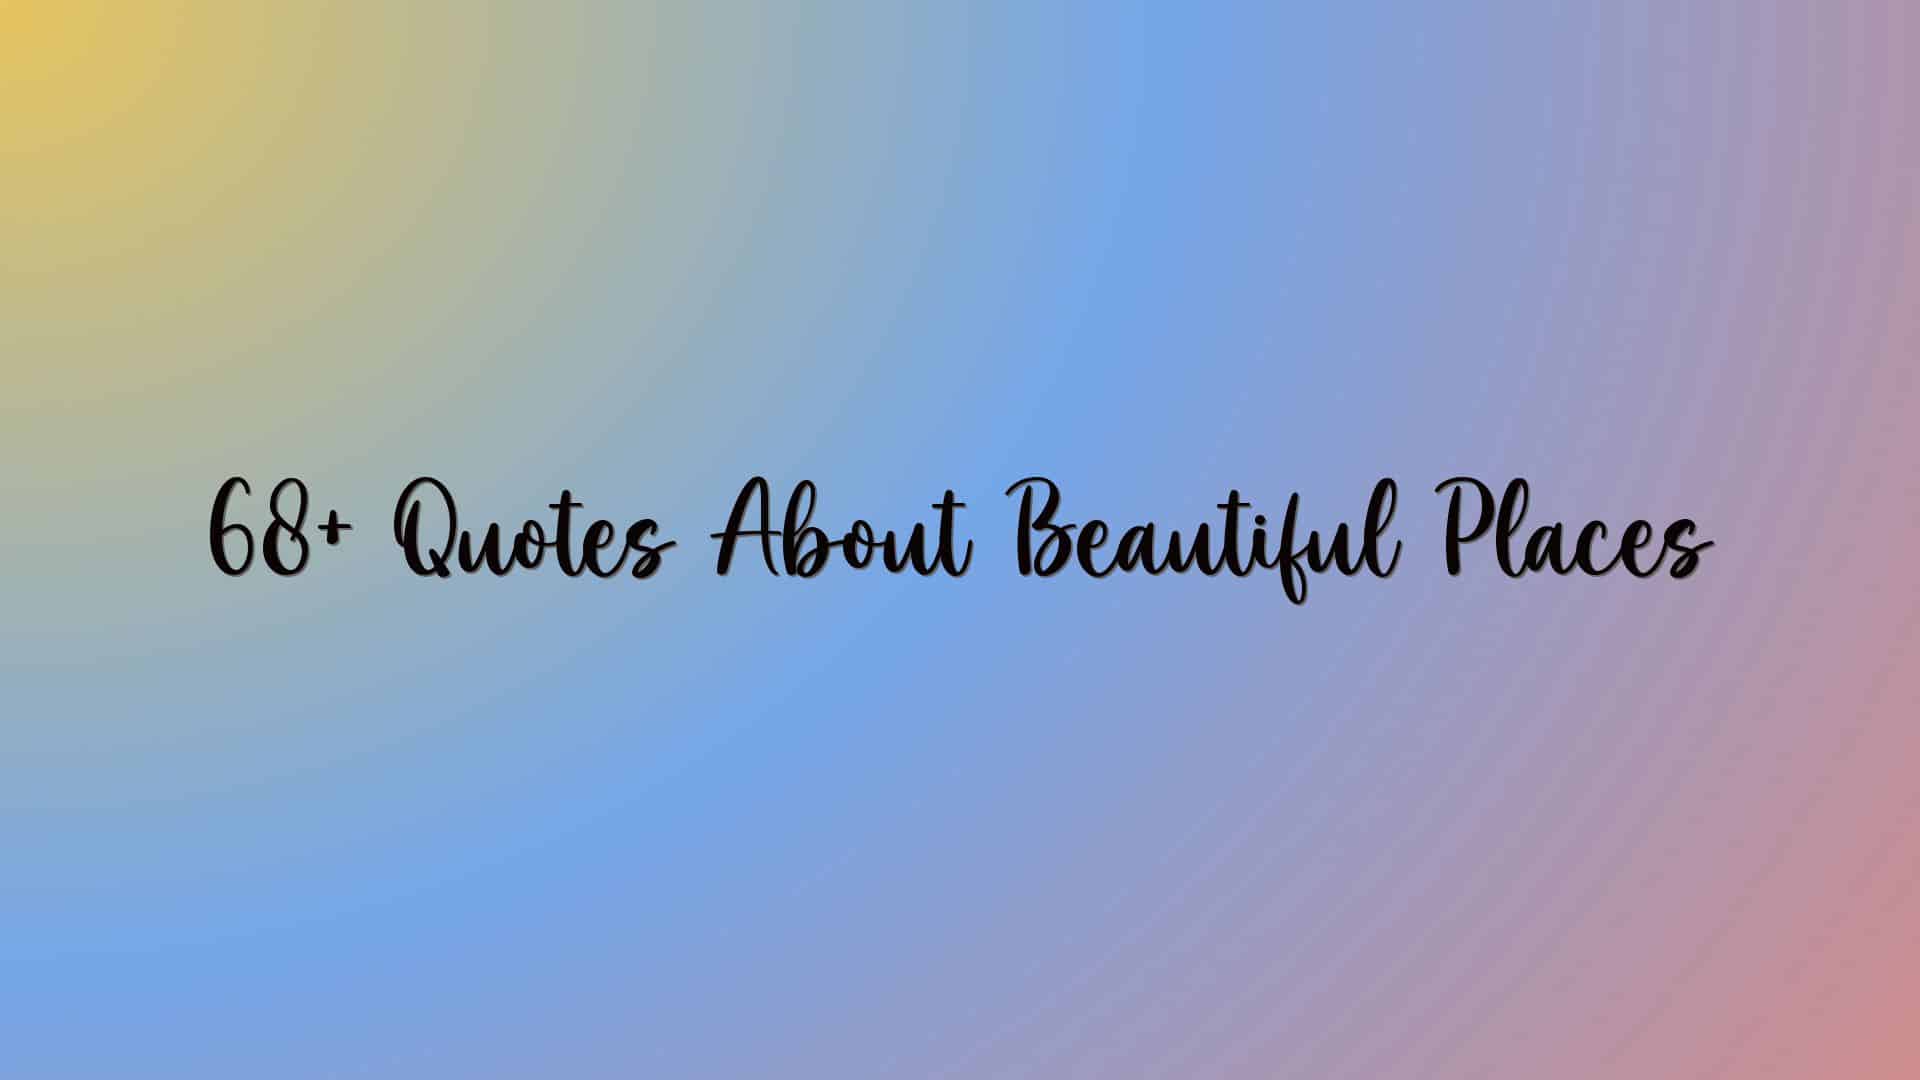 68+ Quotes About Beautiful Places